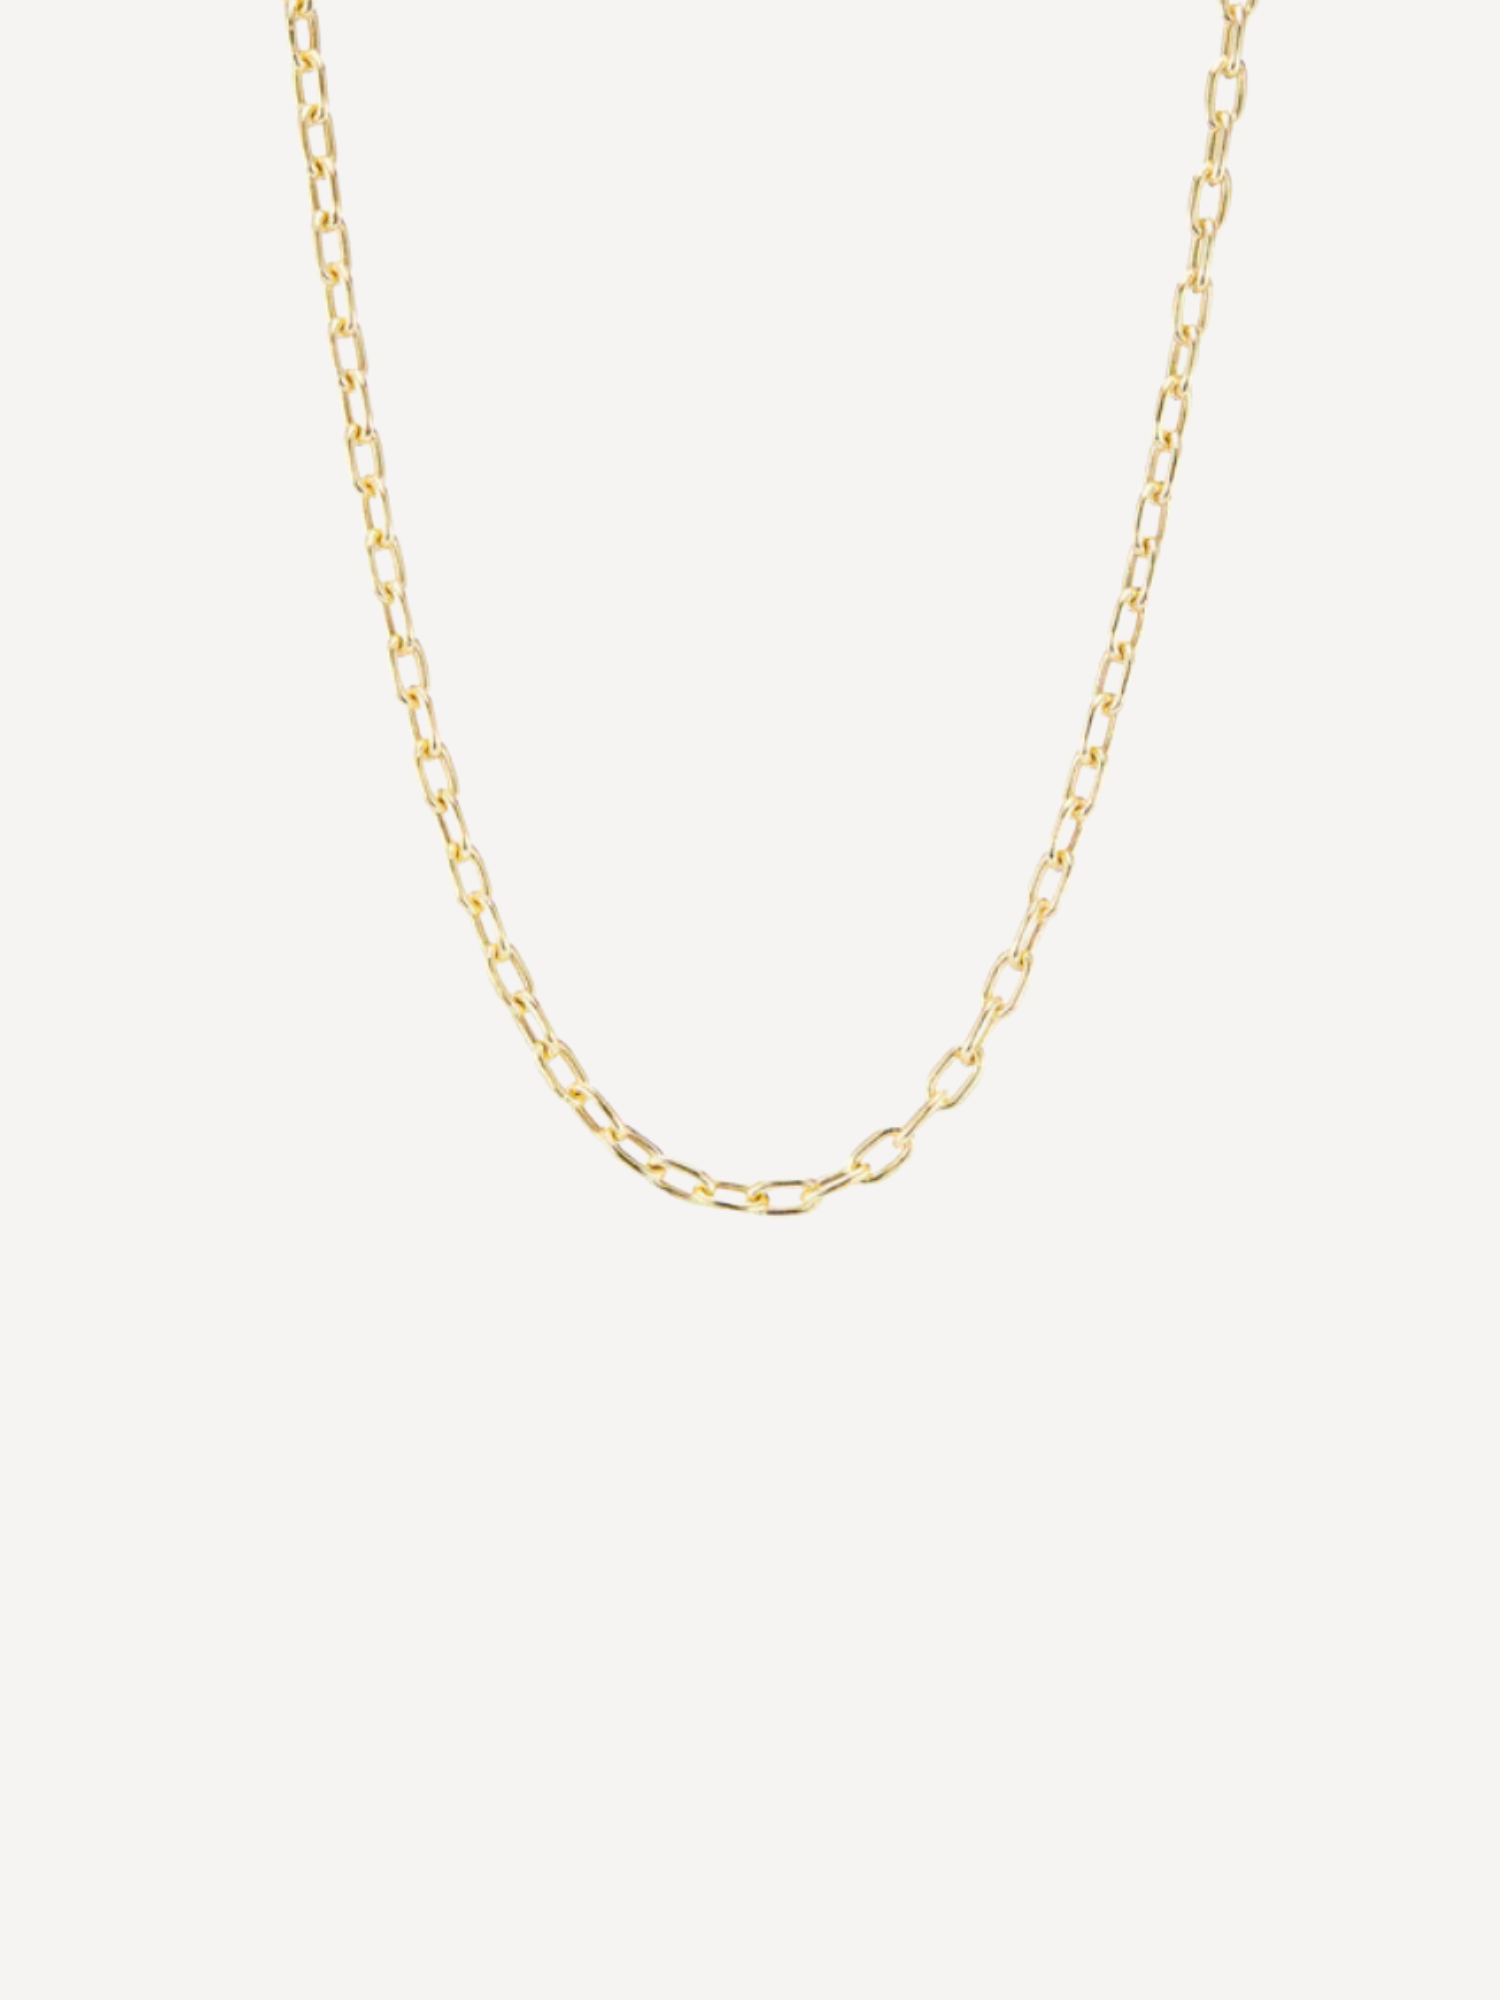 Elongated Chain Link Necklace Thick